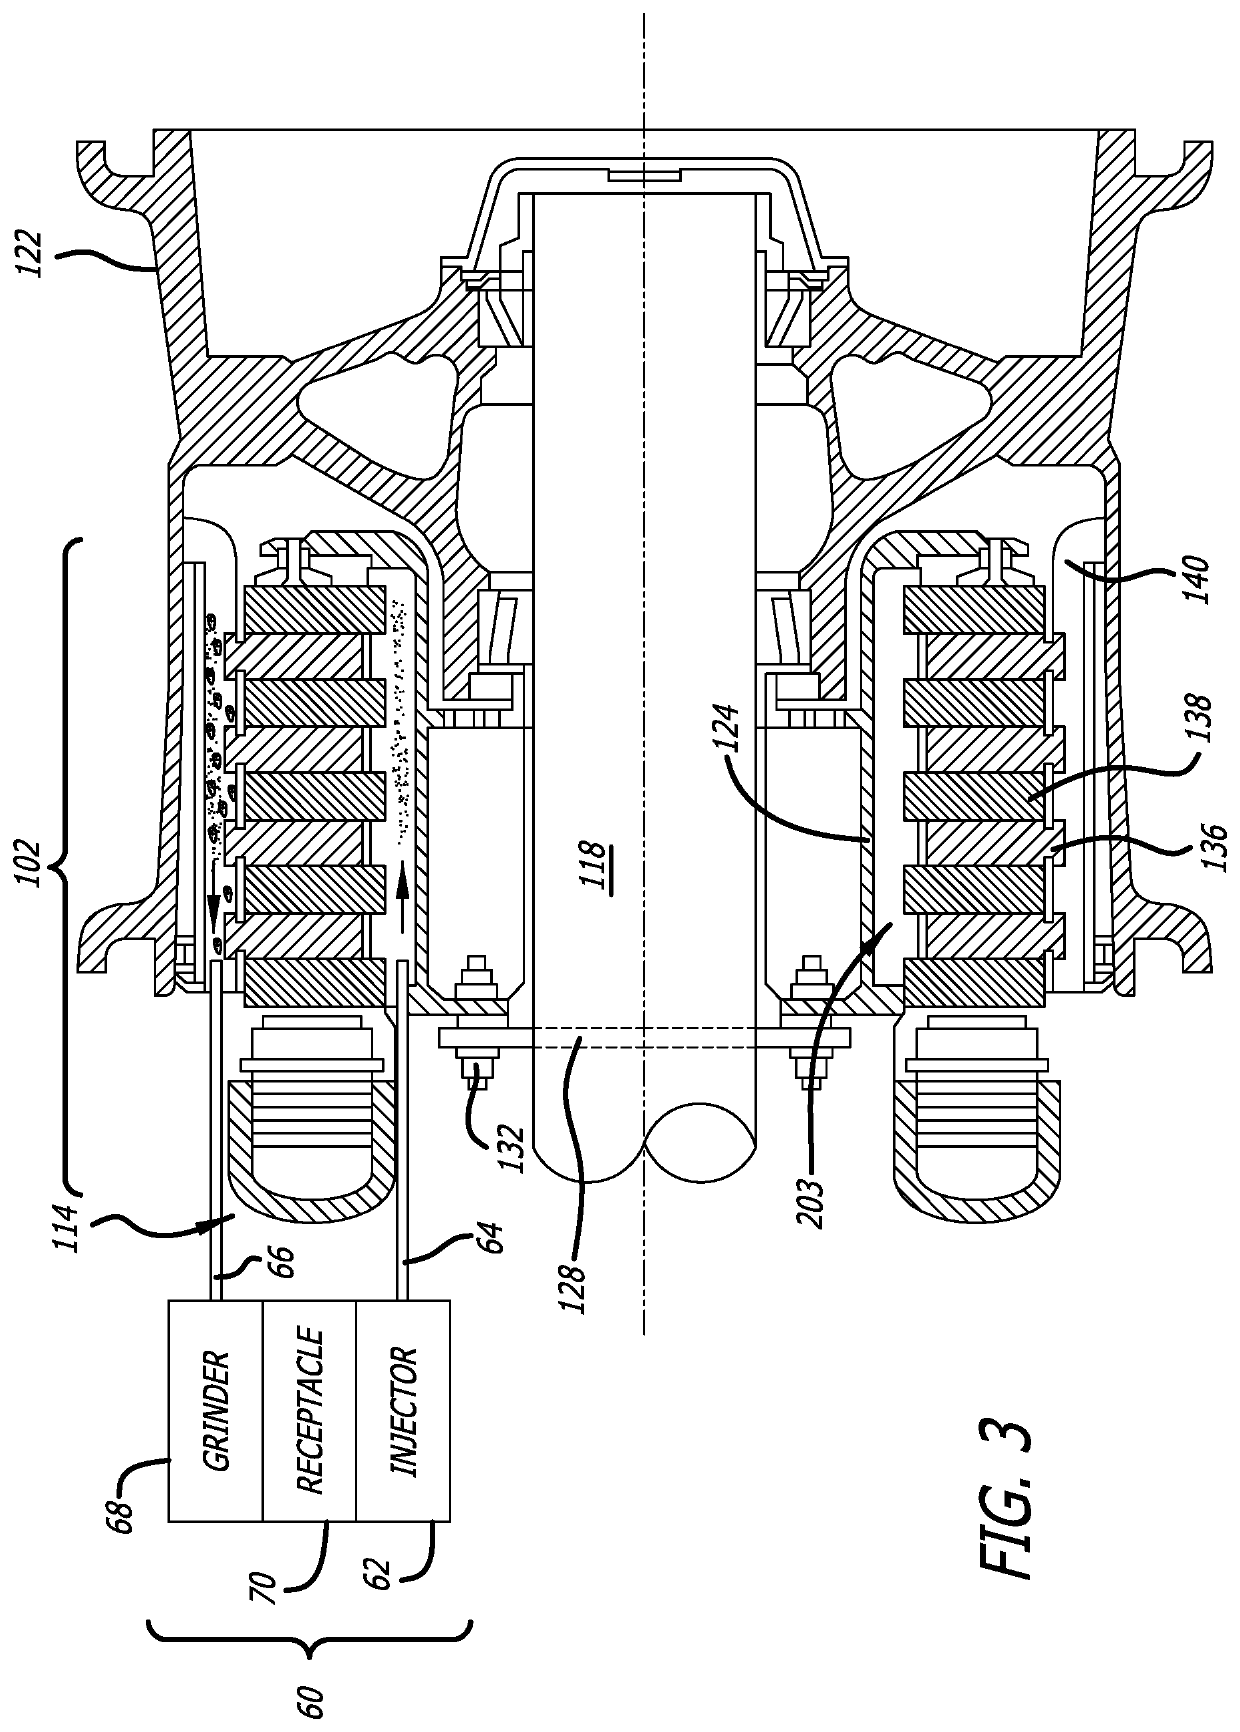 System and method for reducing aircraft brake wear